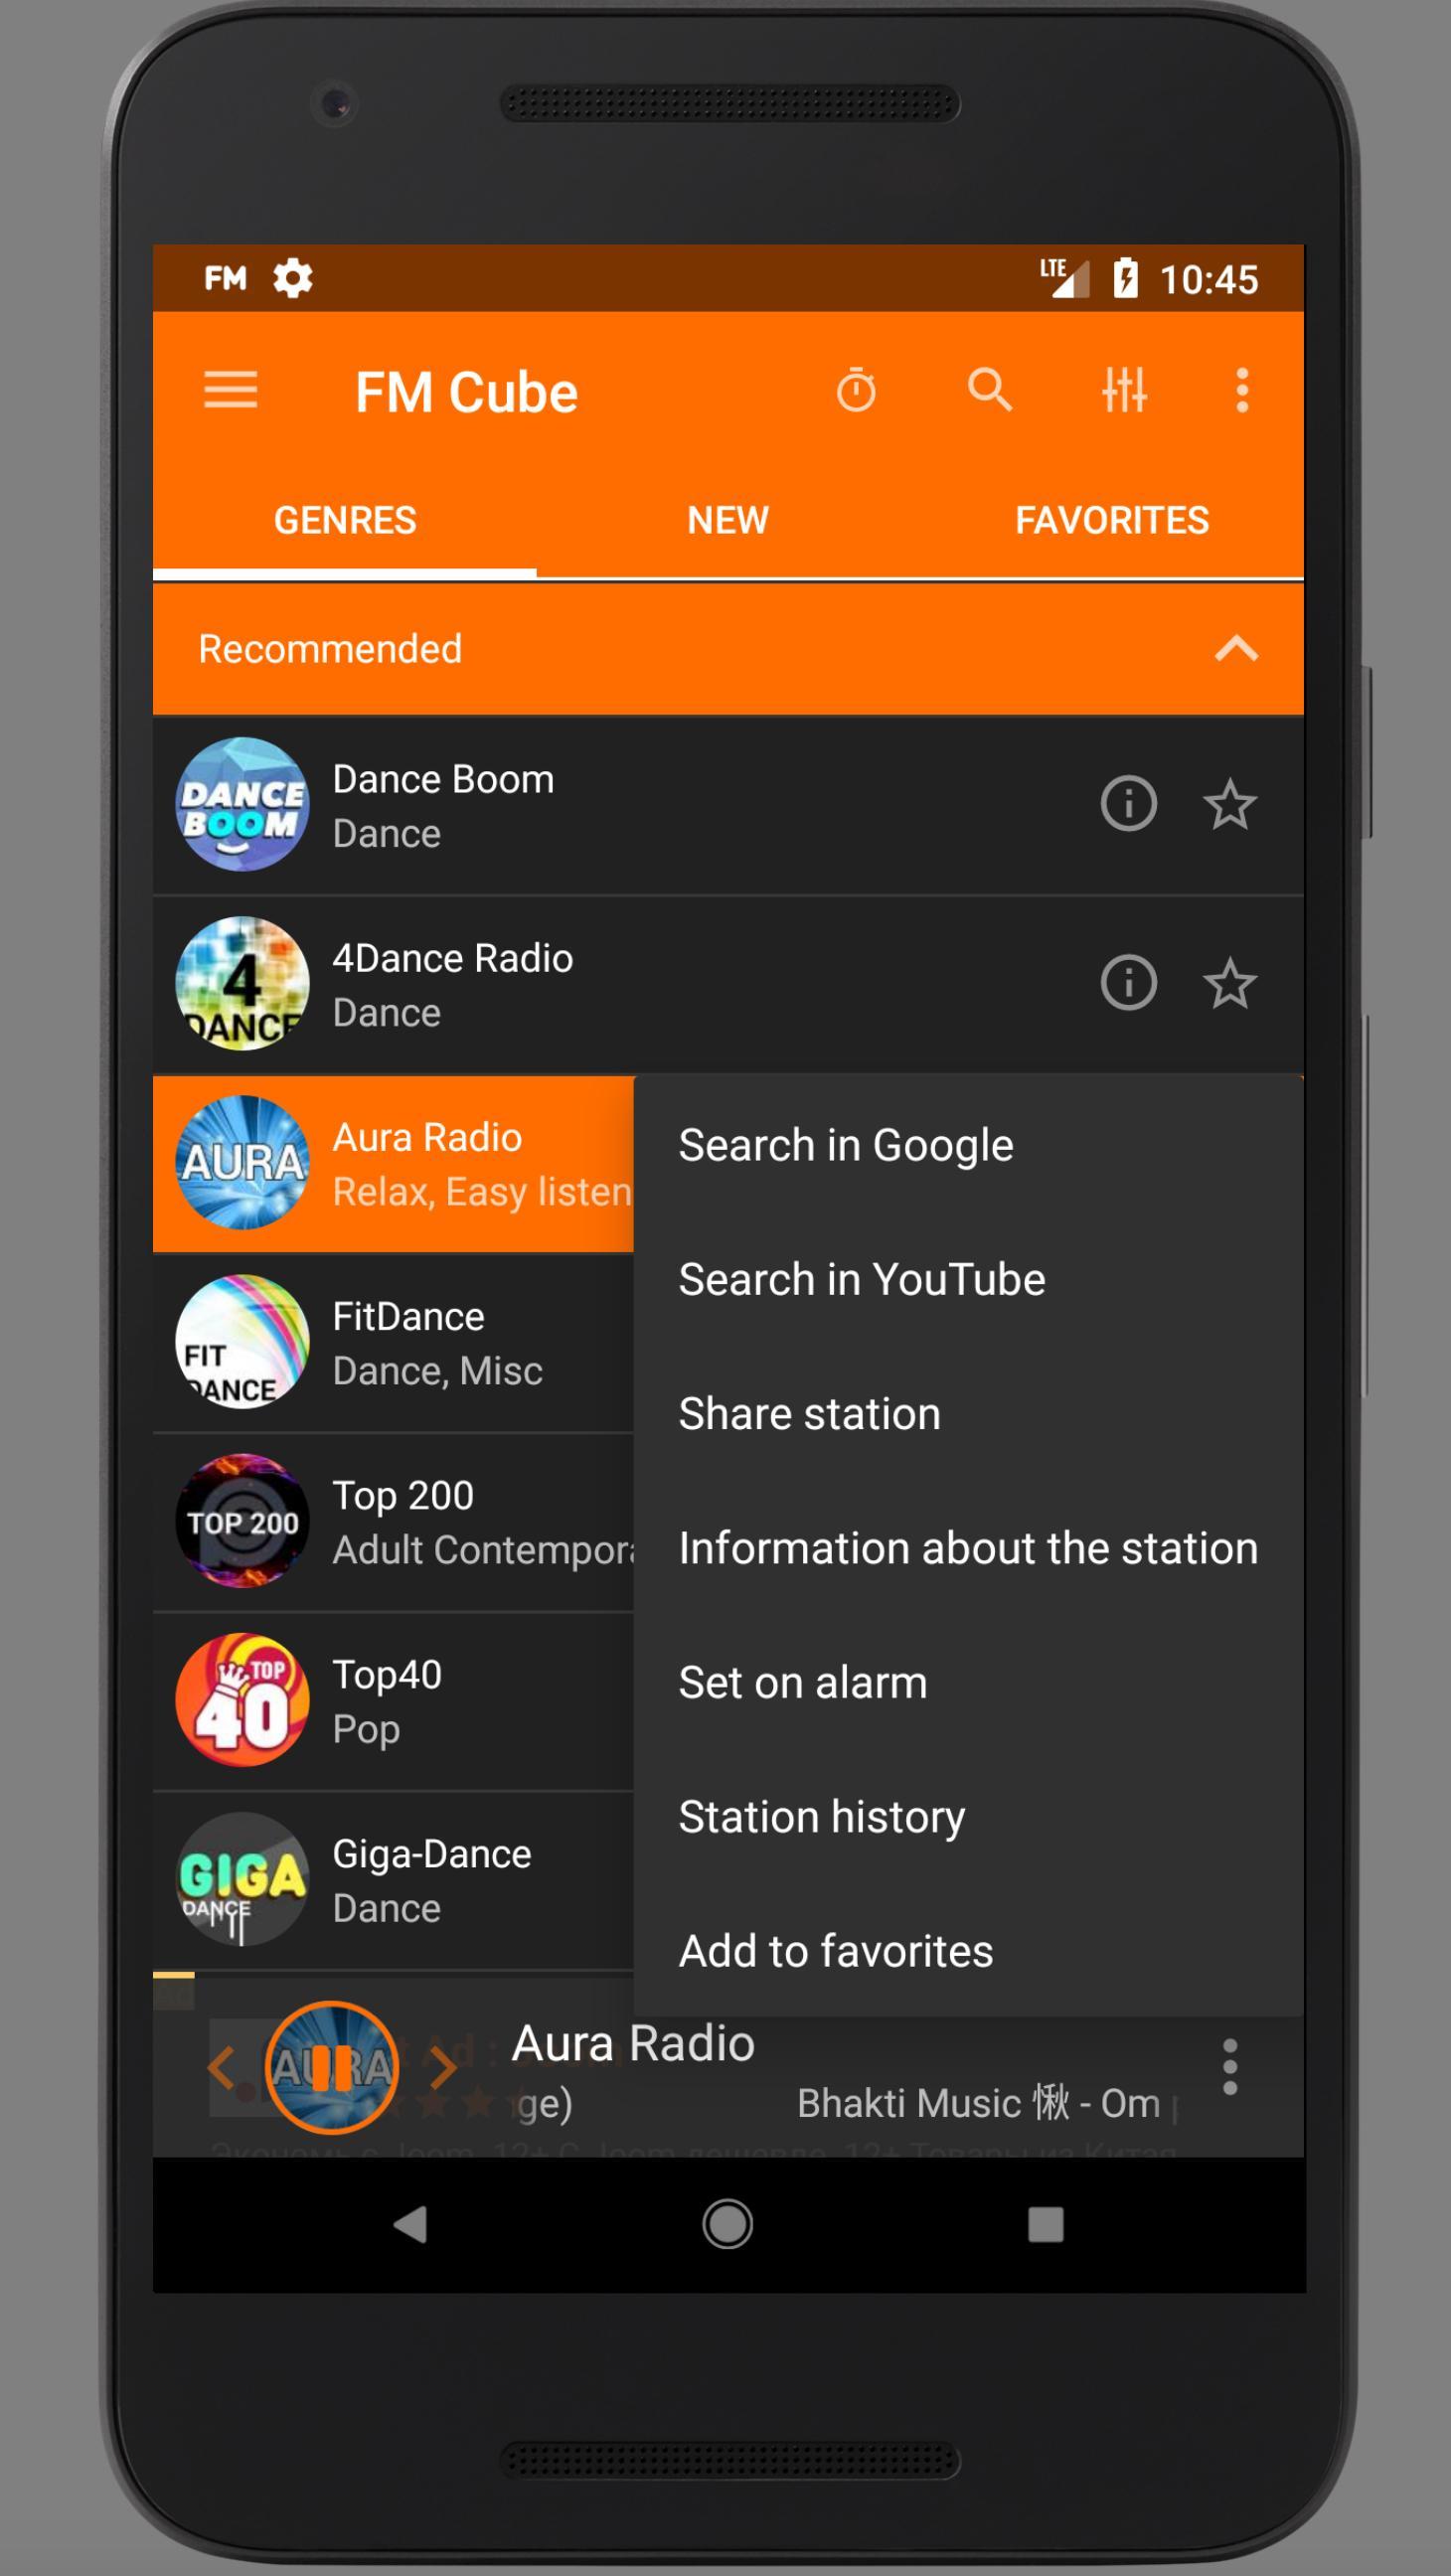 Radio - FM Cube for Android - APK Download